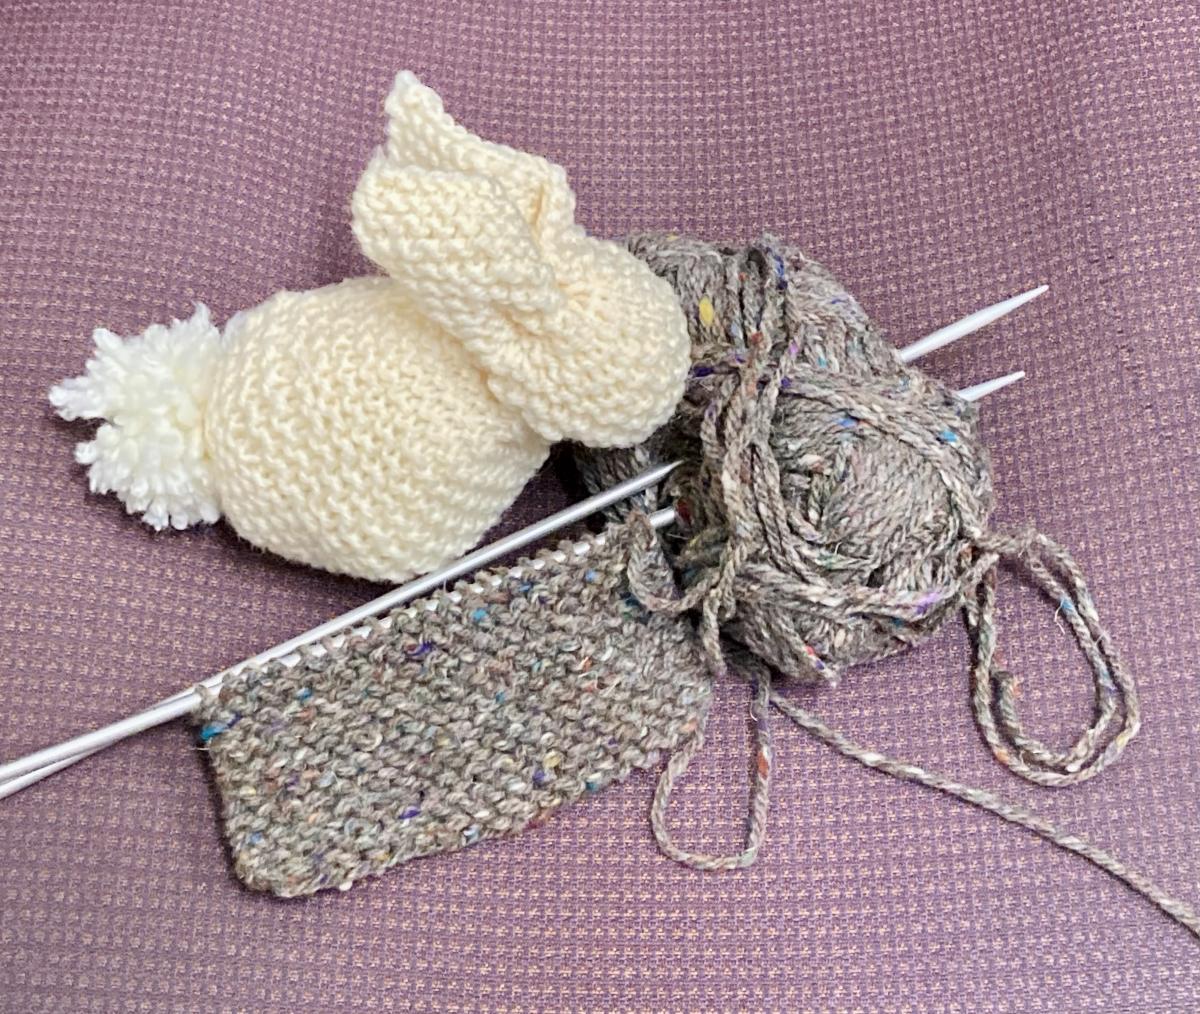 Cream colored knit bunny sits next to a project on knitting needles stabbed into gray yarn.